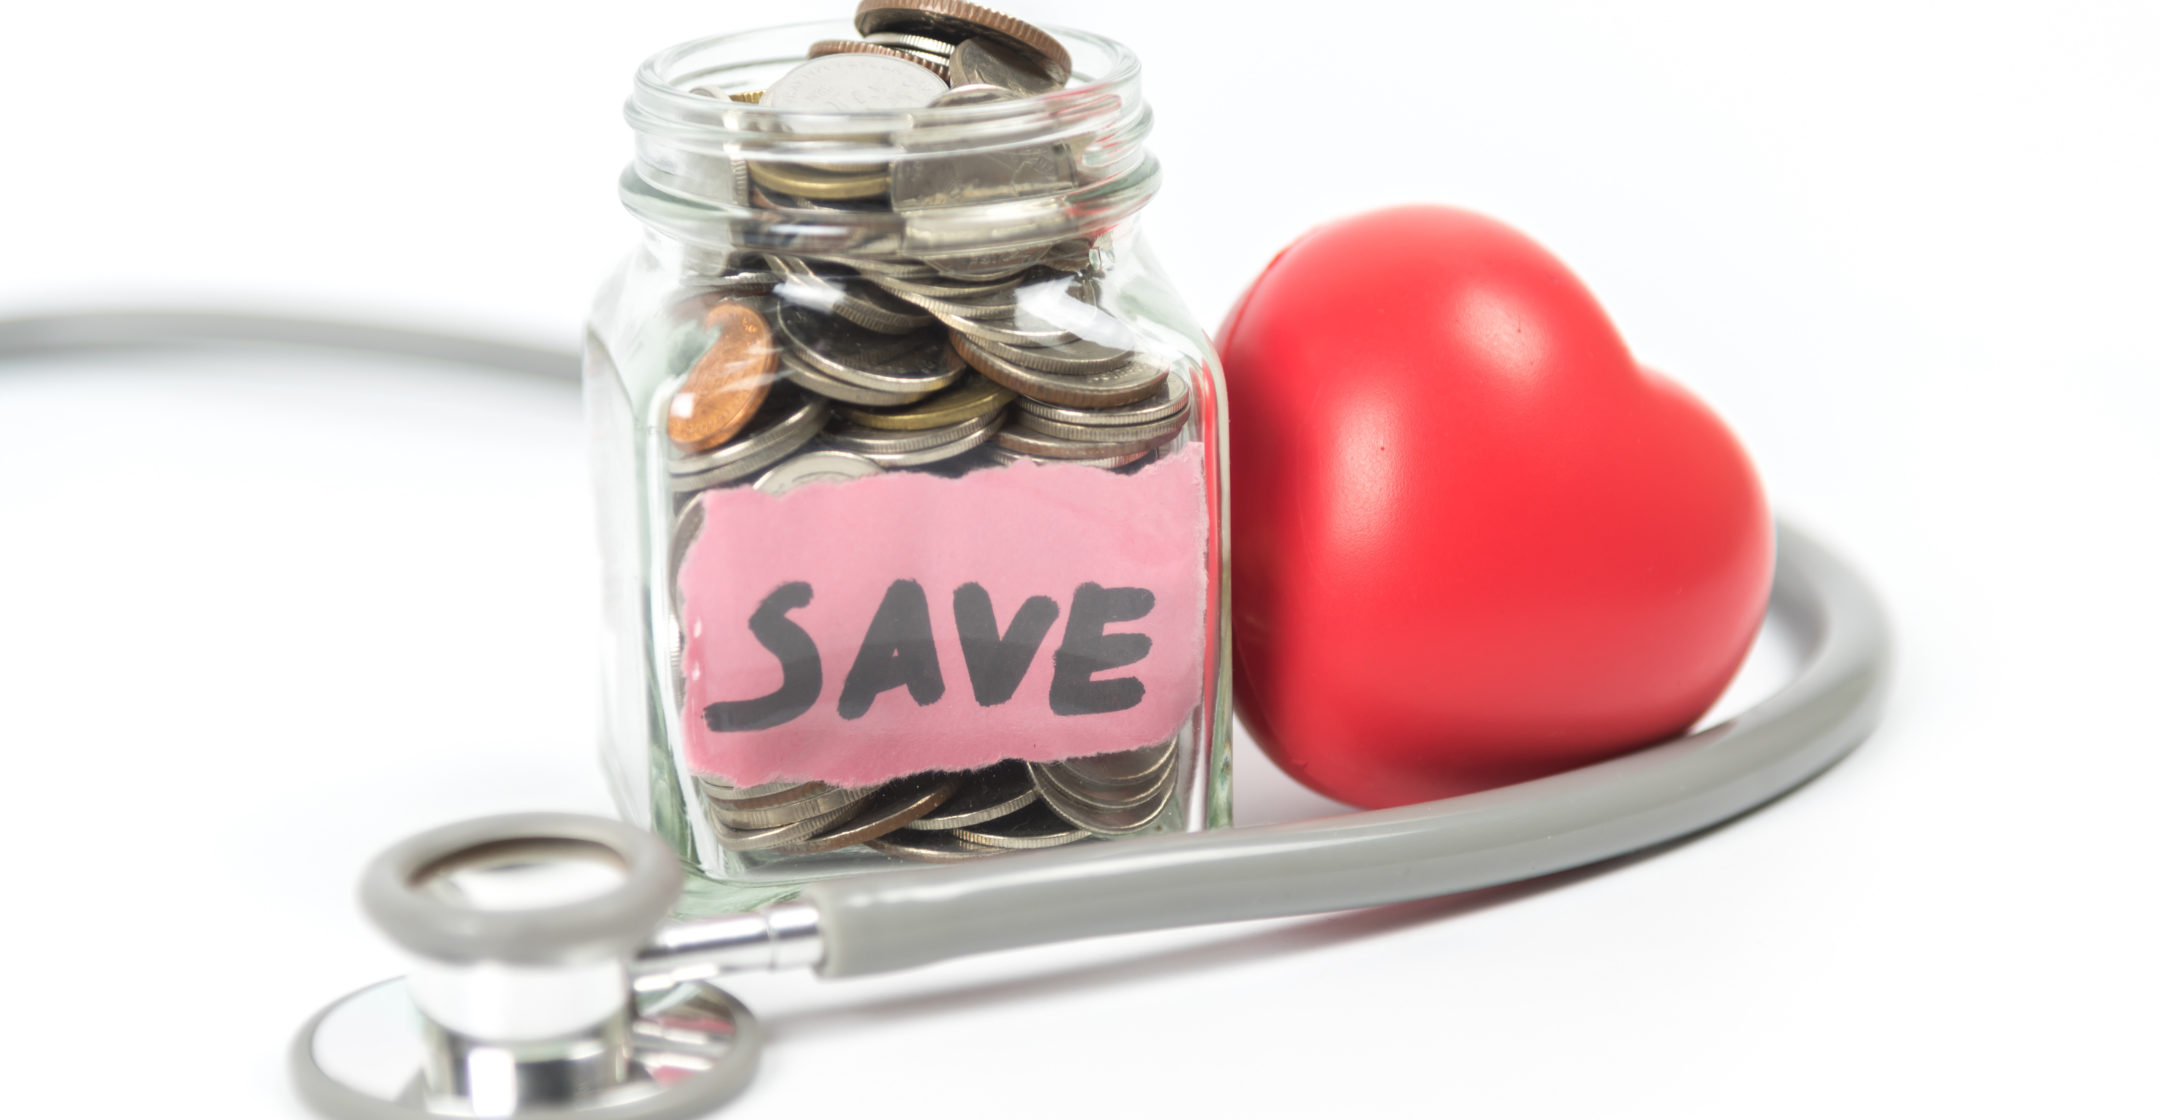 10 Reasons Why You Should Max Out Your Health Savings Account (HSA)